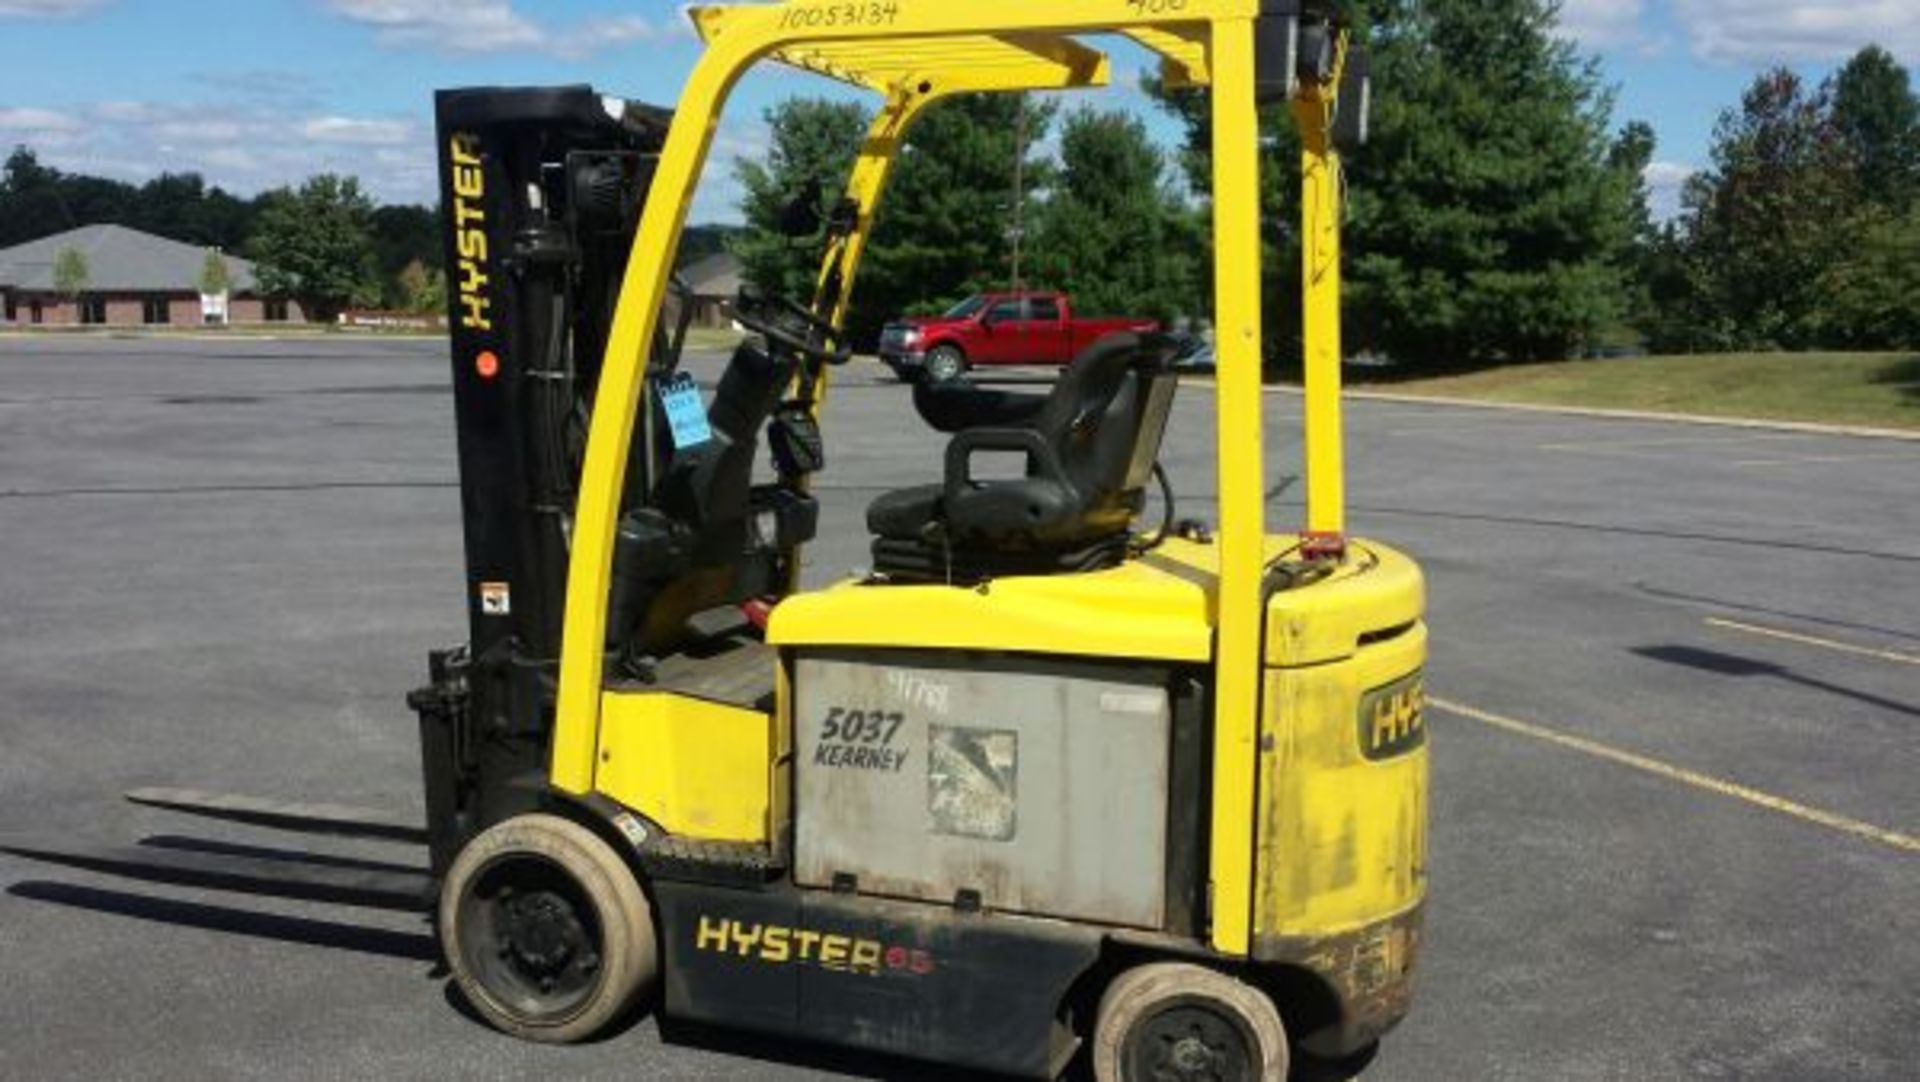 6,500 LB HYSTER MODEL E65XN-40 ELECTRIC SIT DOWN LIFT TRUCK; S/N A268N02166G, 188" LIFT HEIGHT - Image 2 of 4